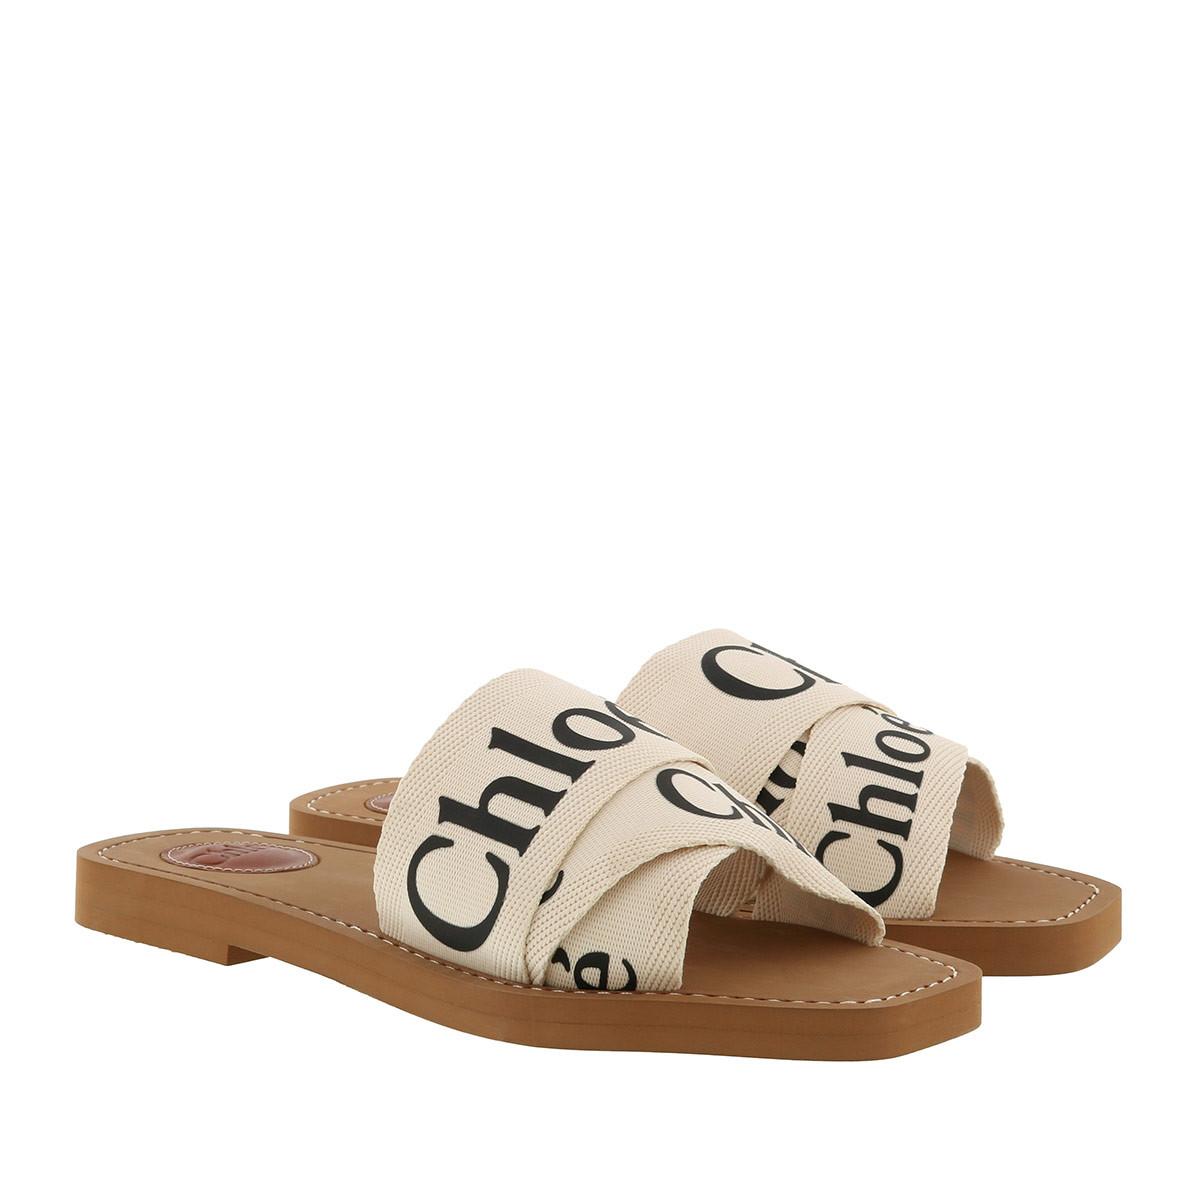 Chloé Woody Logo-print Canvas Sandals in White - Save 63% - Lyst